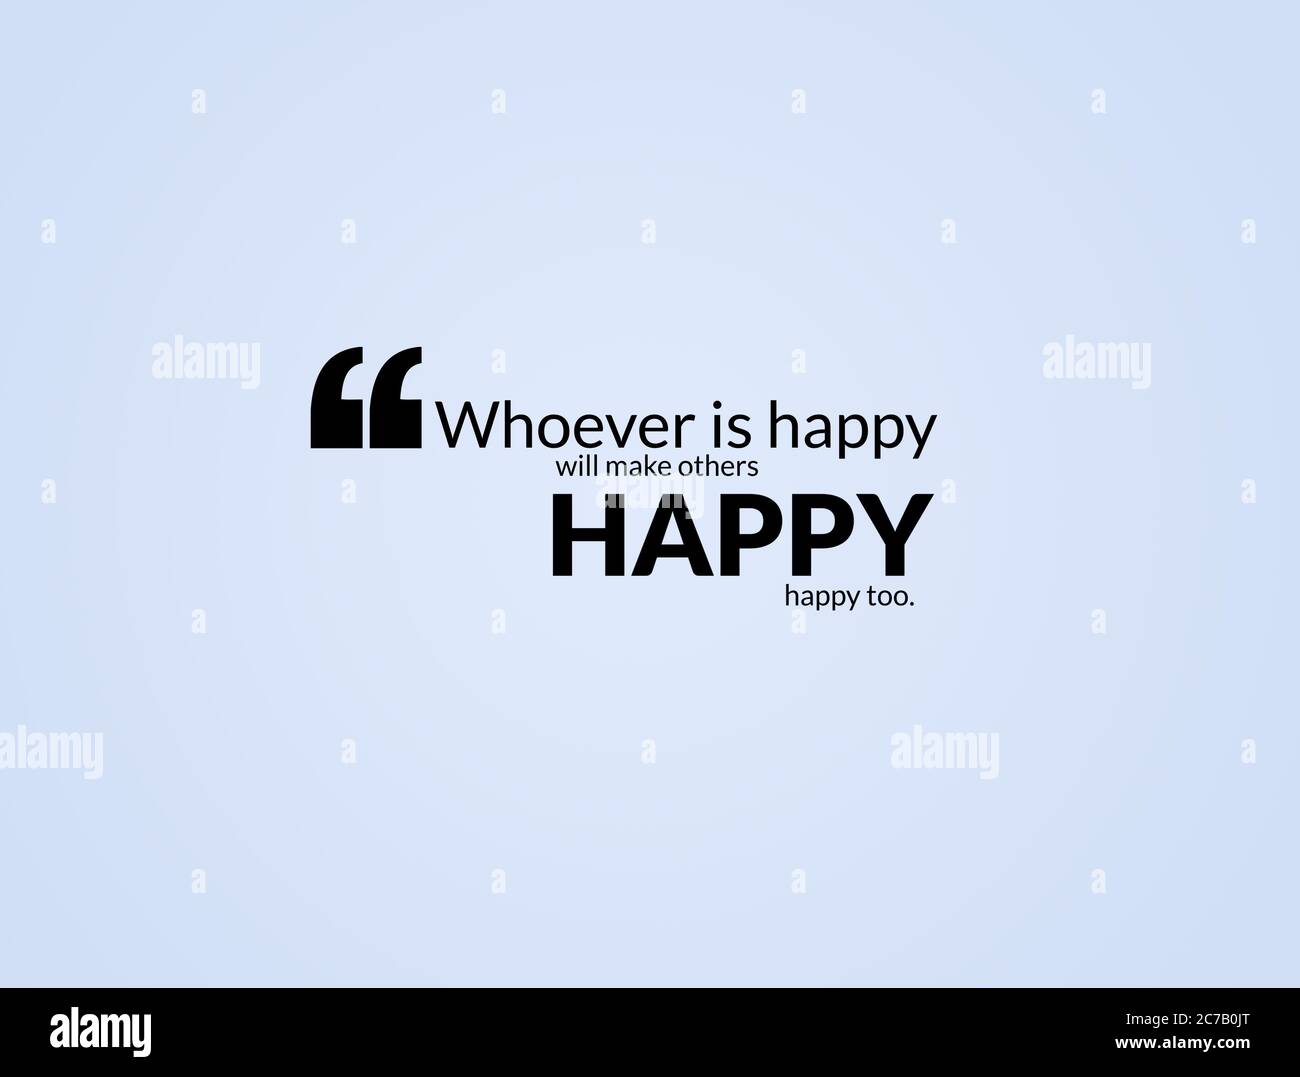 The Ultimate Collection of 999+ Happy Quotes Images - Stunning Full 4K ...